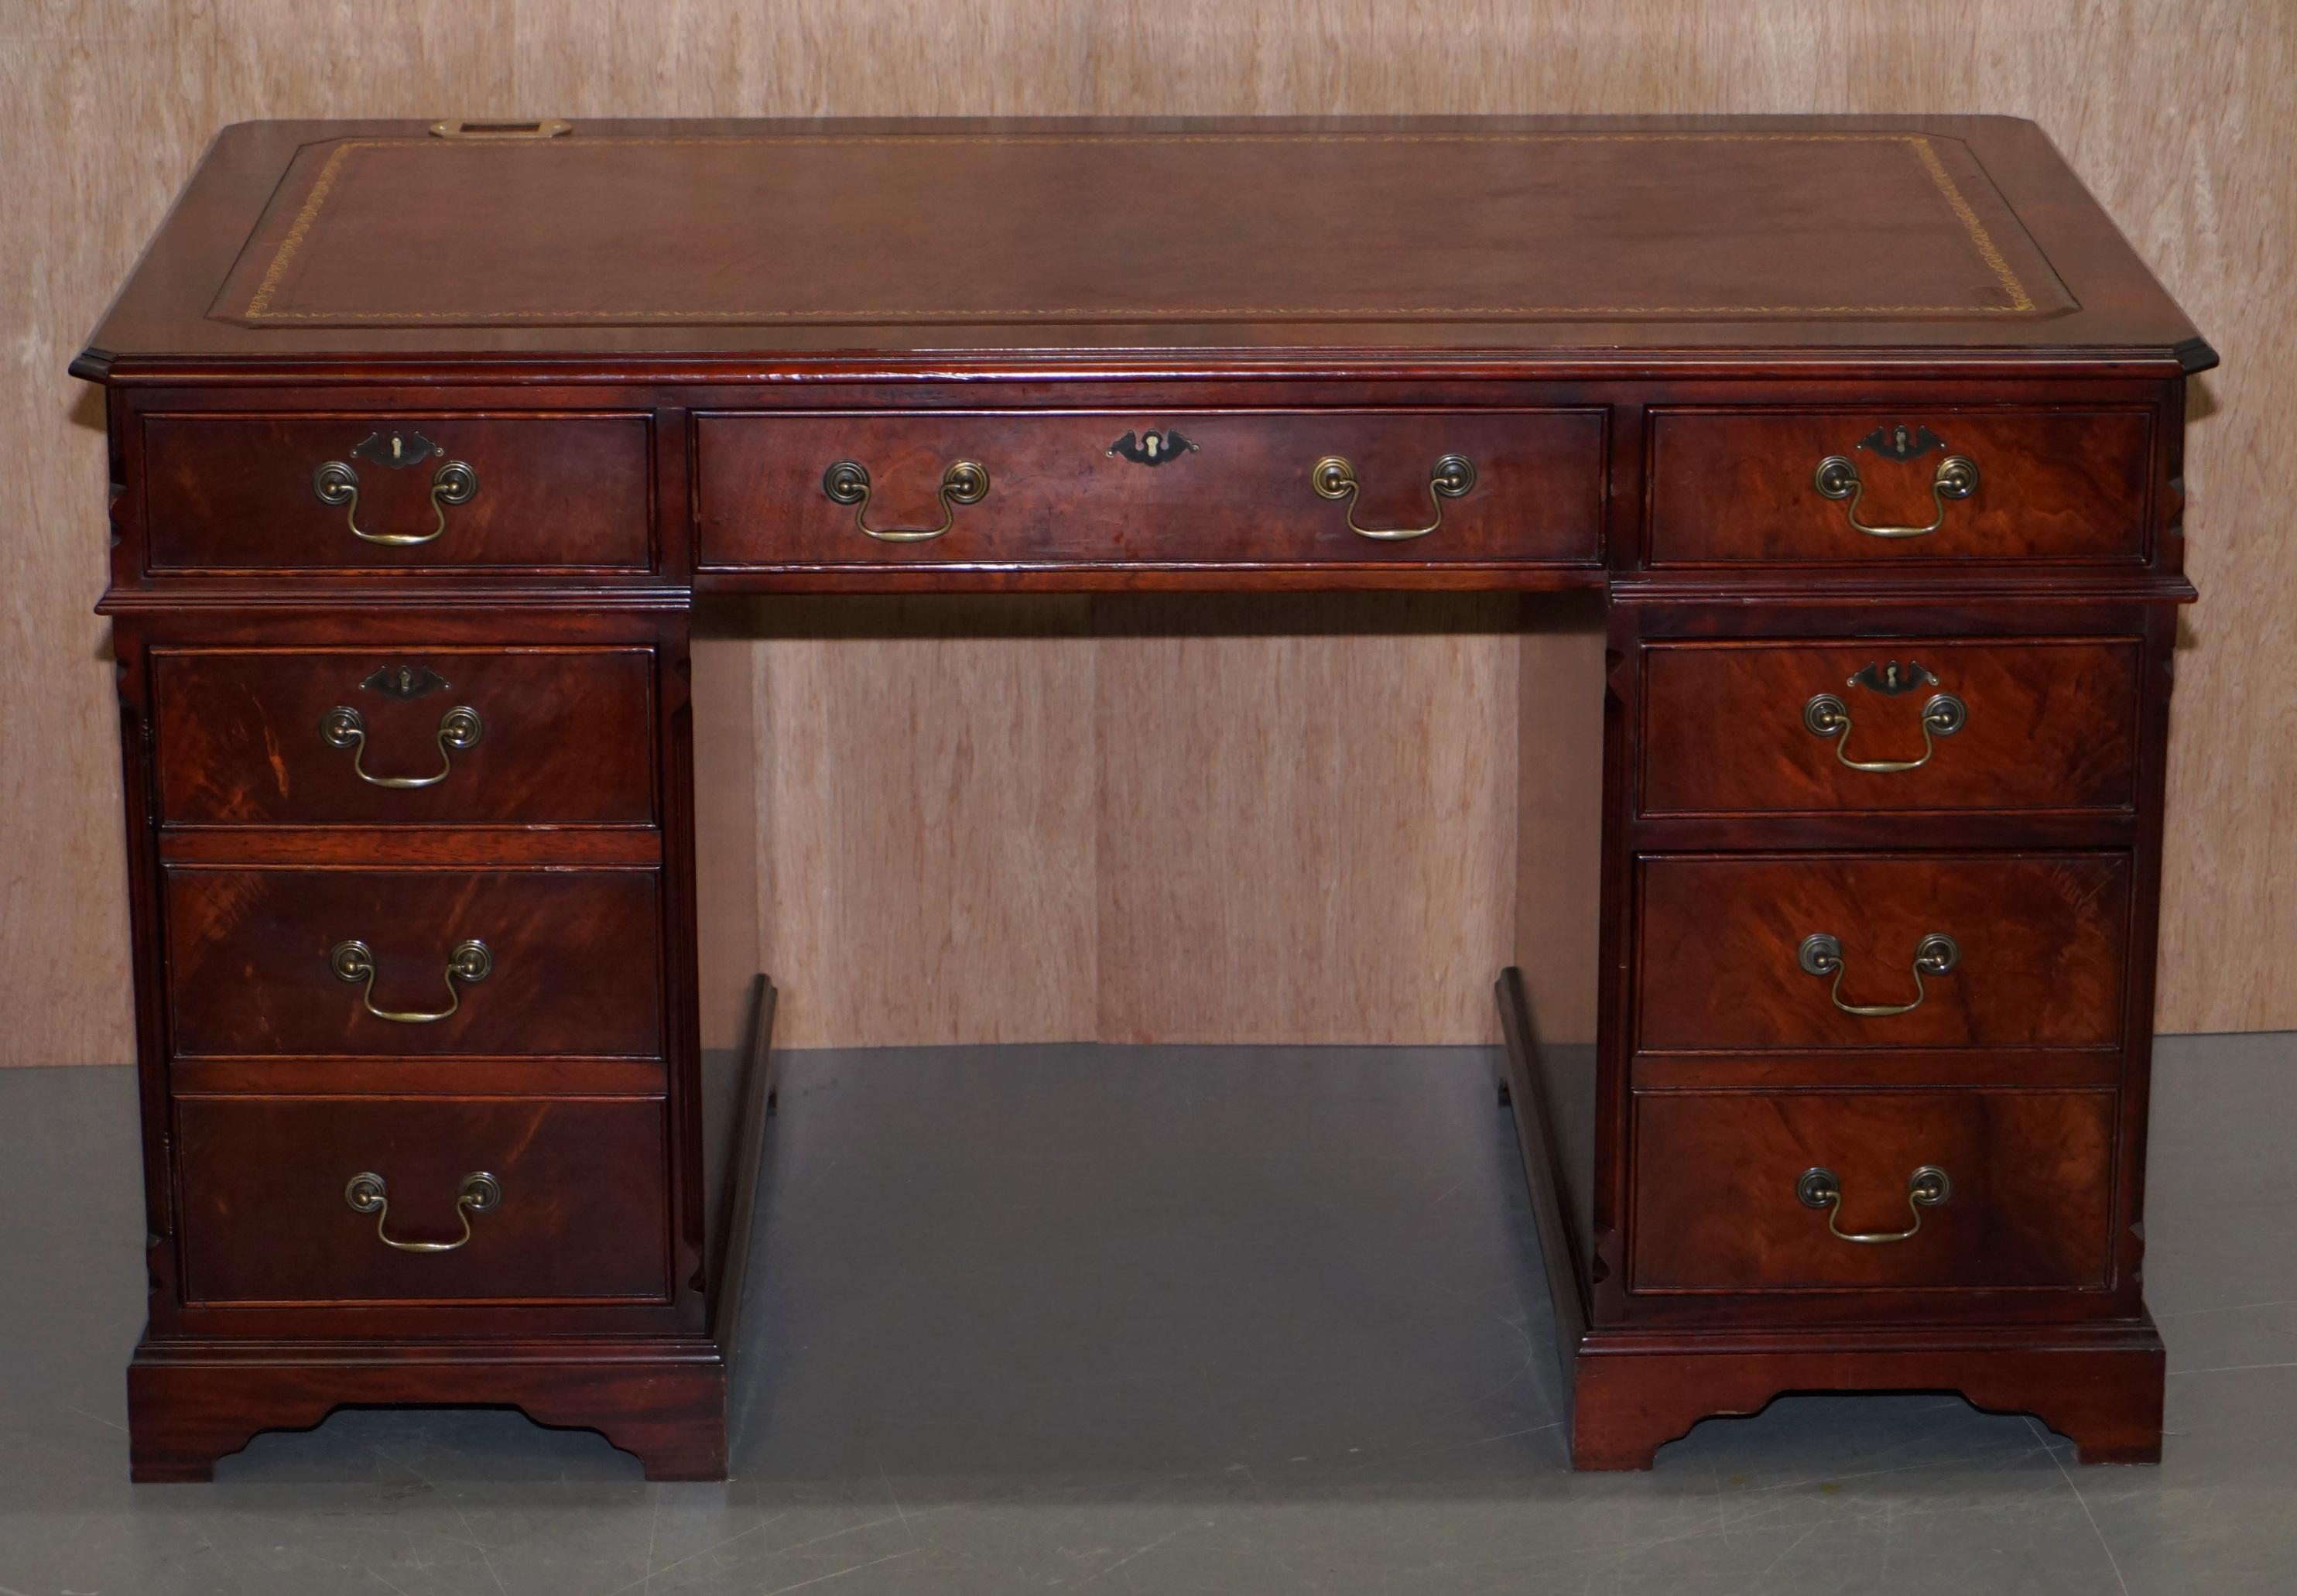 We are delighted to offer for sale this stunning custom made premium flamed mahogany with oxblood leather writing surface twin pedestal partner desk

A very good looking and well made desk, it is specially designed as mentioned to use and hide